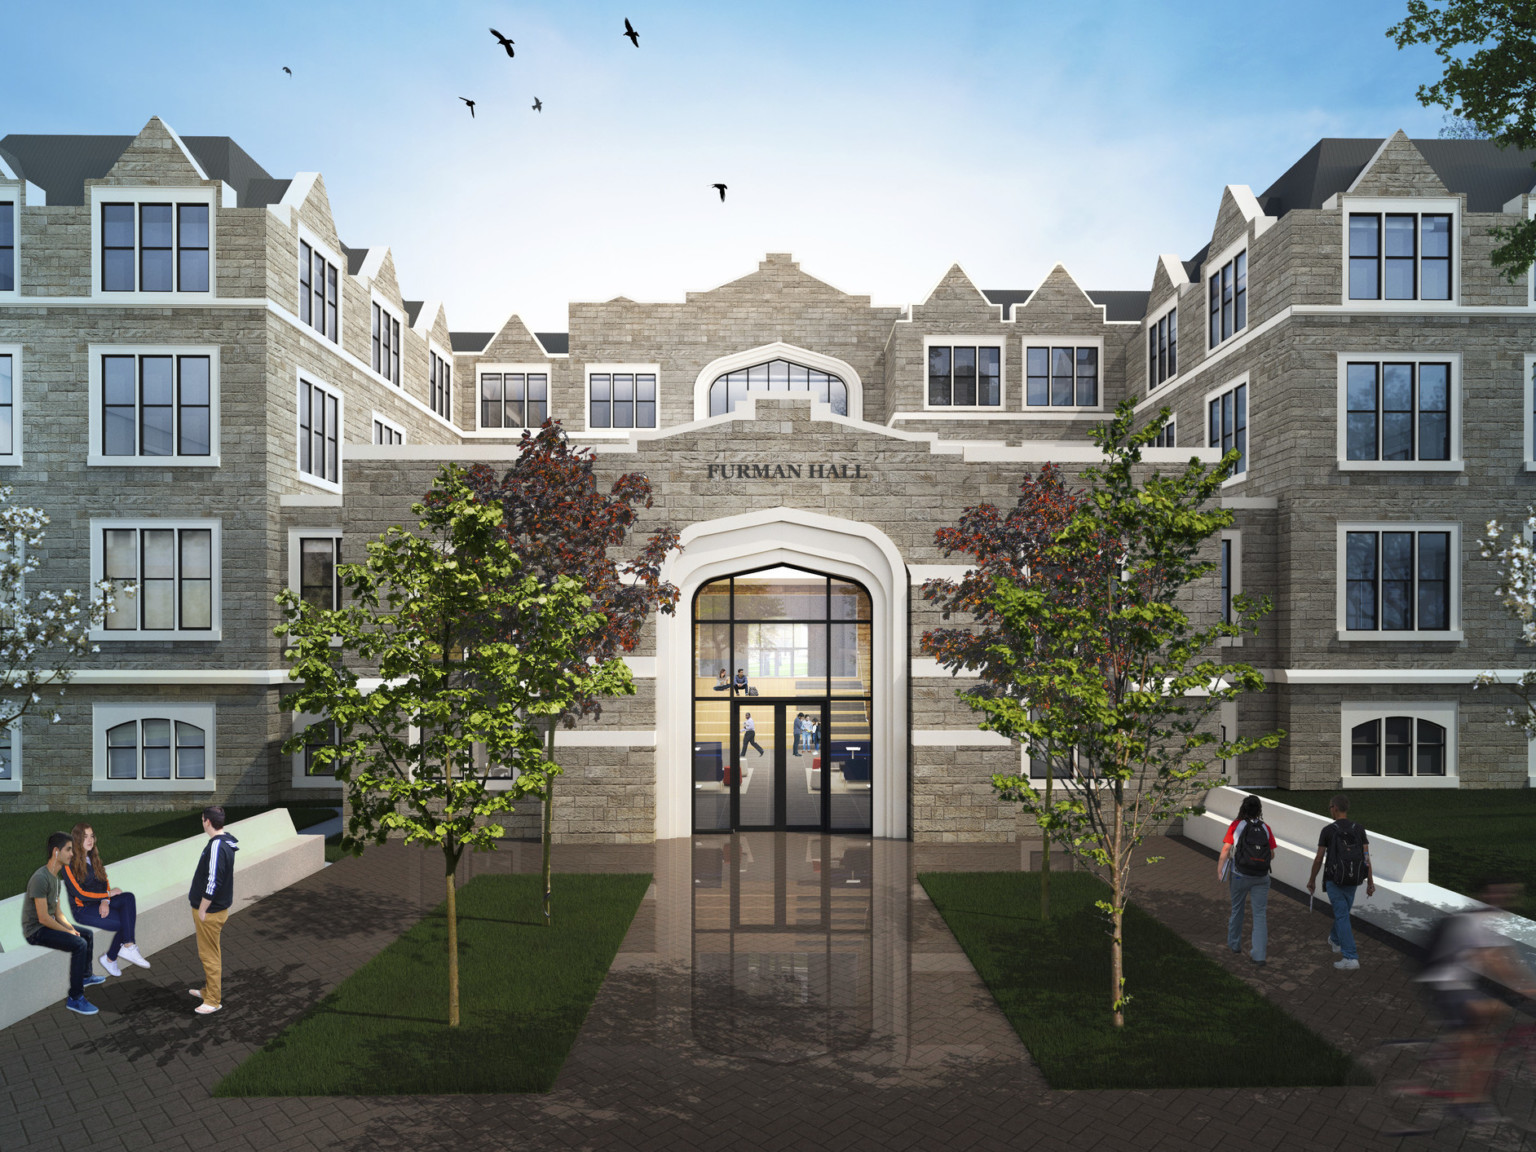 Rendering of entry to Purman Hall, a 4 story stone building with double height lobby entrance. Seating in courtyard walkway